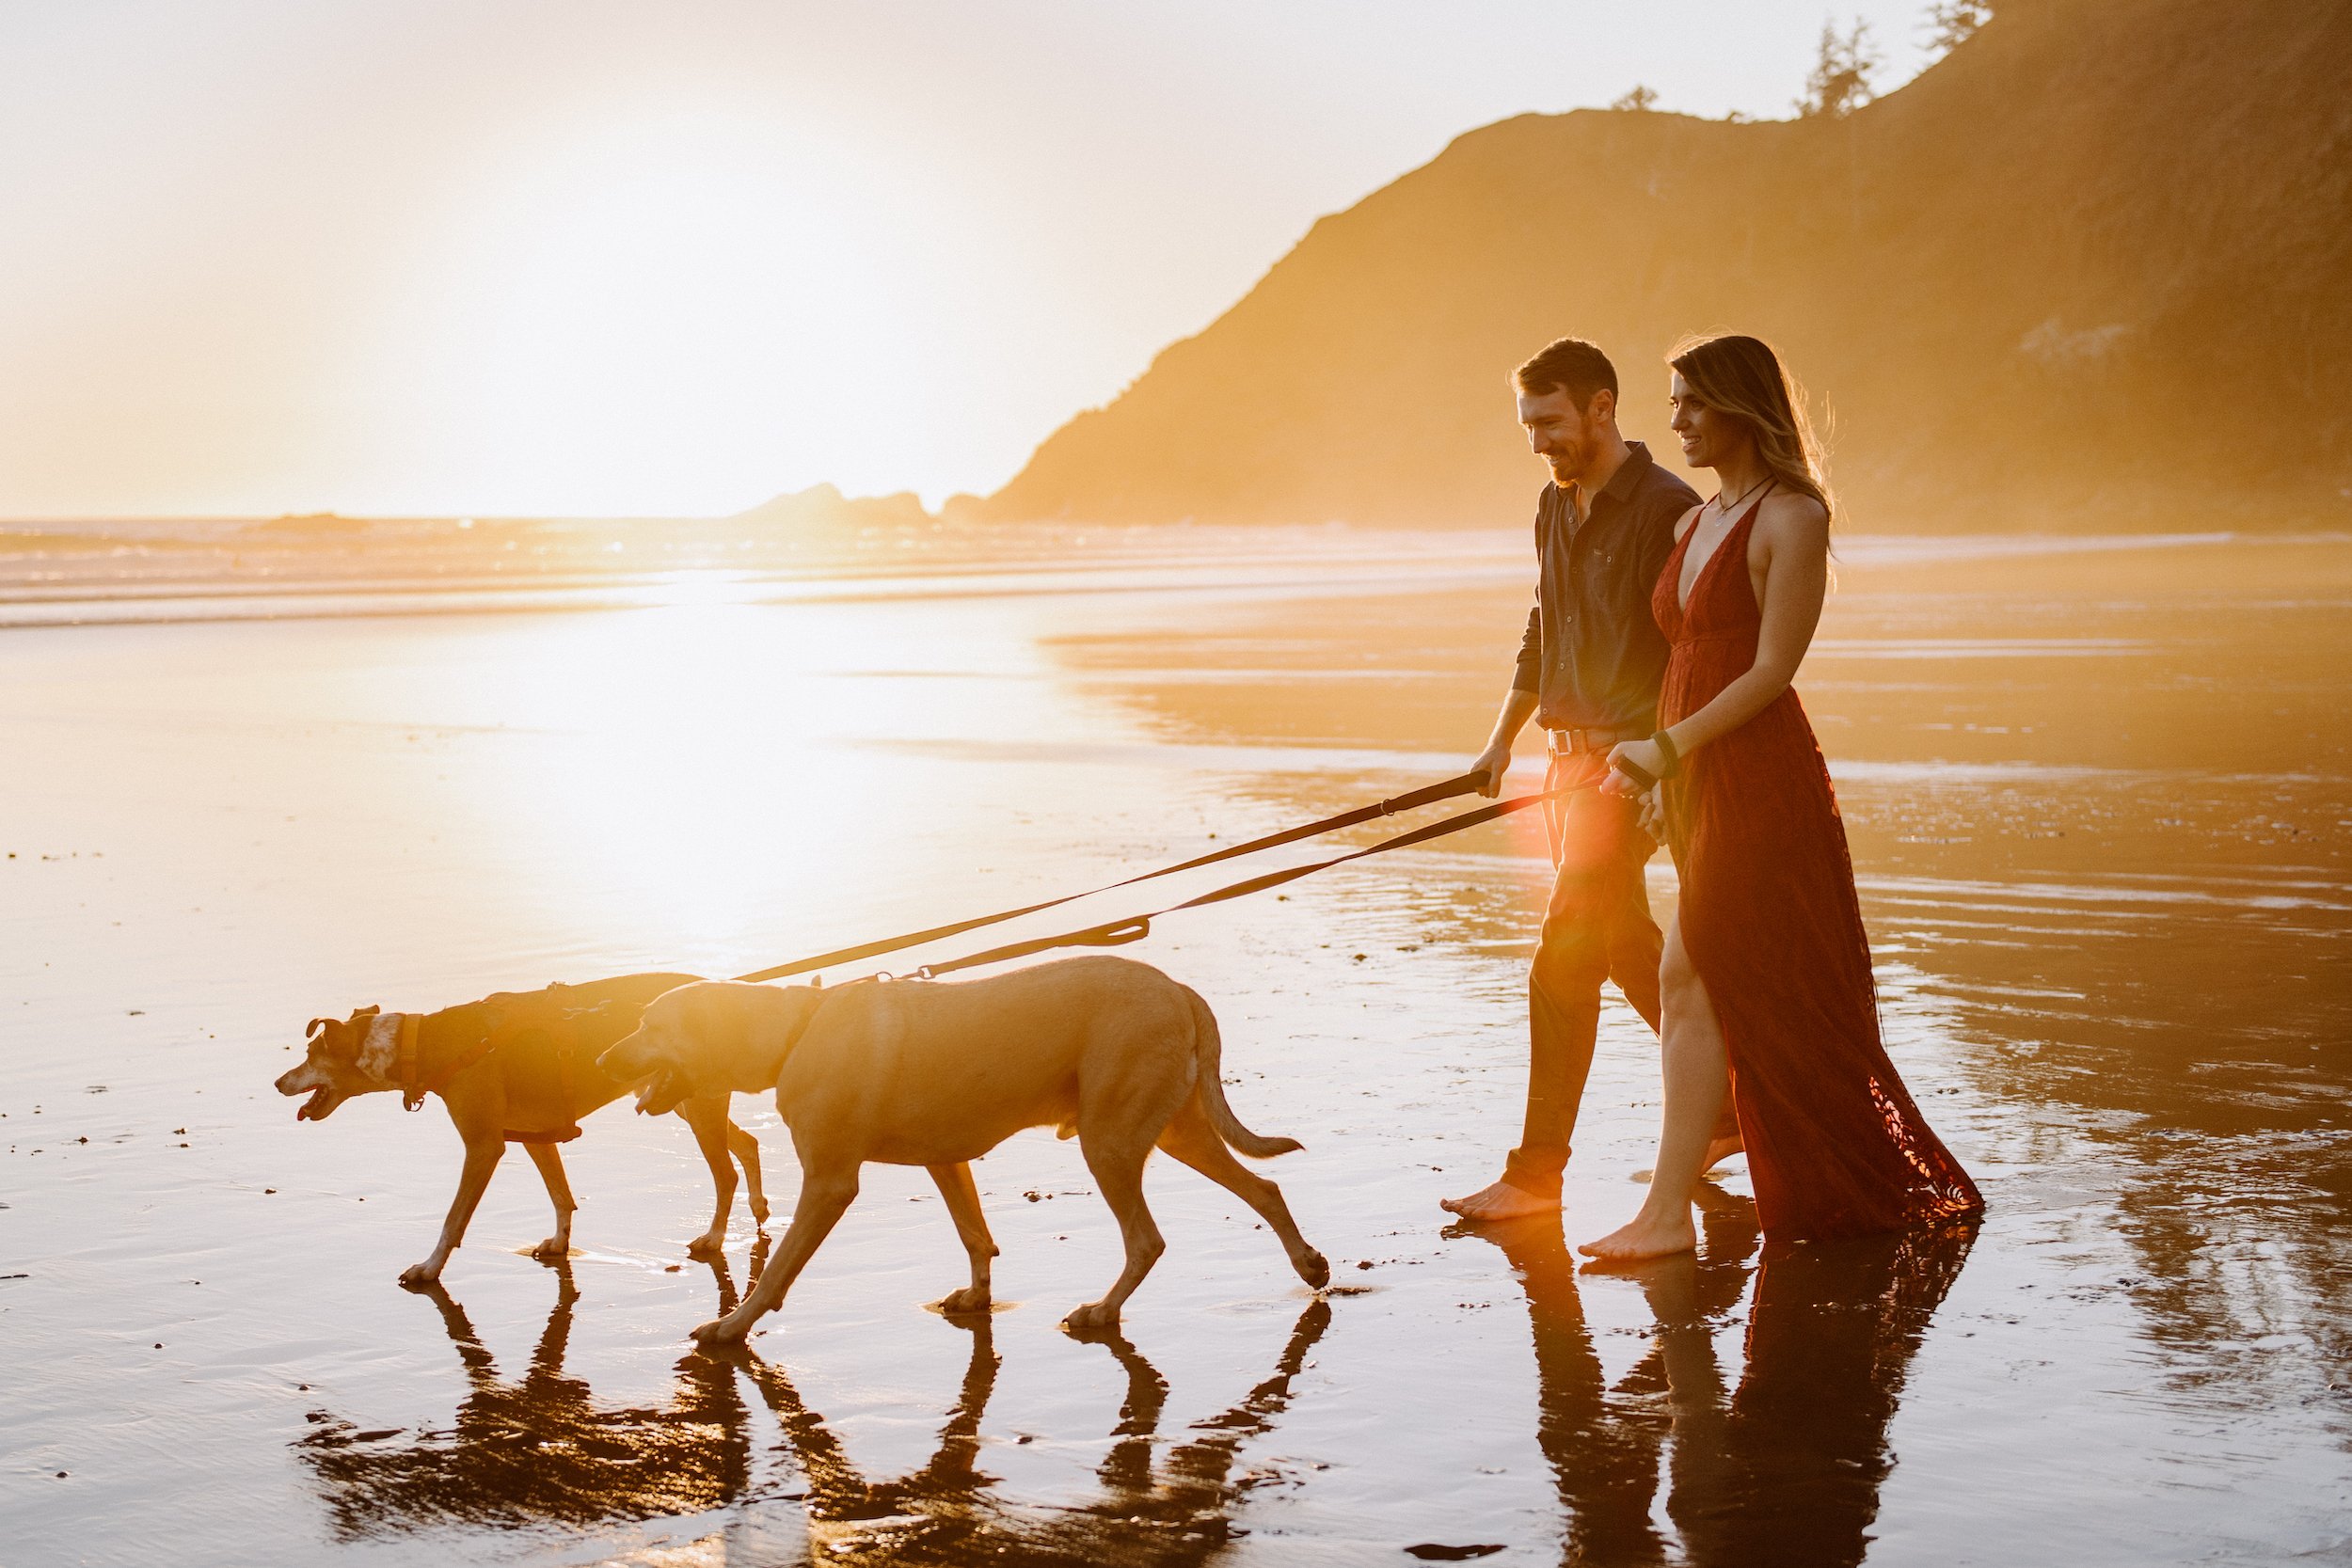 A man and woman walk barefoot on a beach with two dogs at sunset